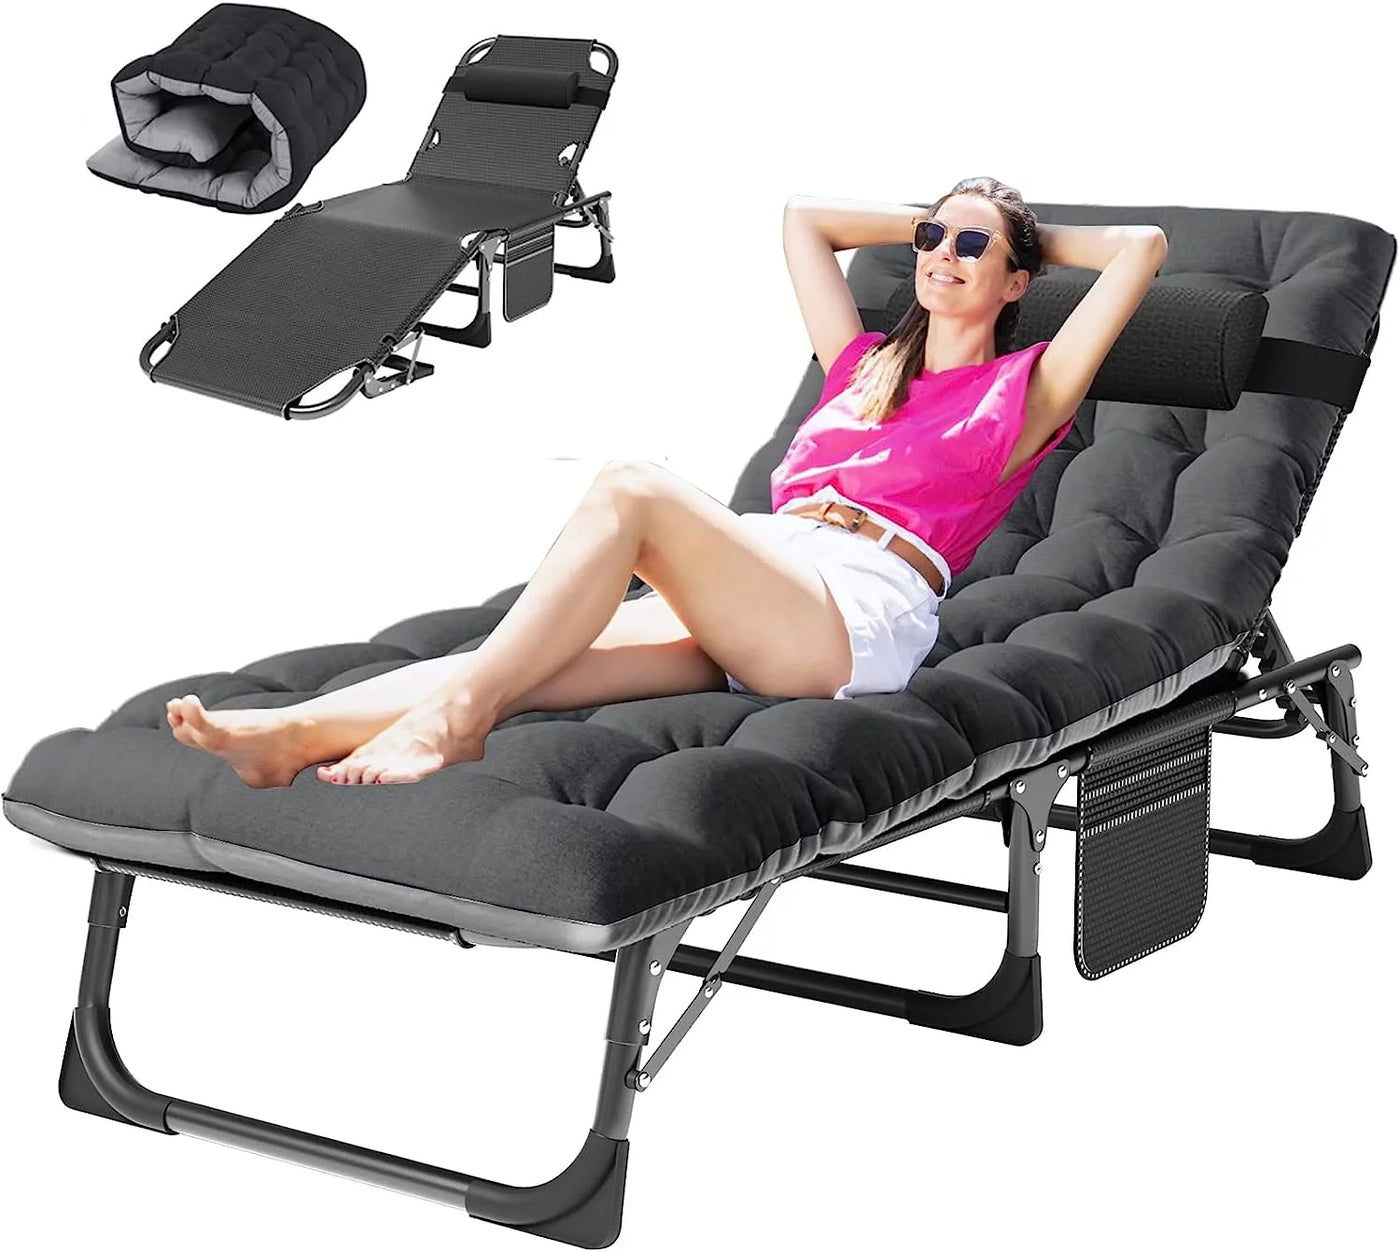 5 Position Folding Lounge Chair - Adjustable, Multi-Use Reclining Chair